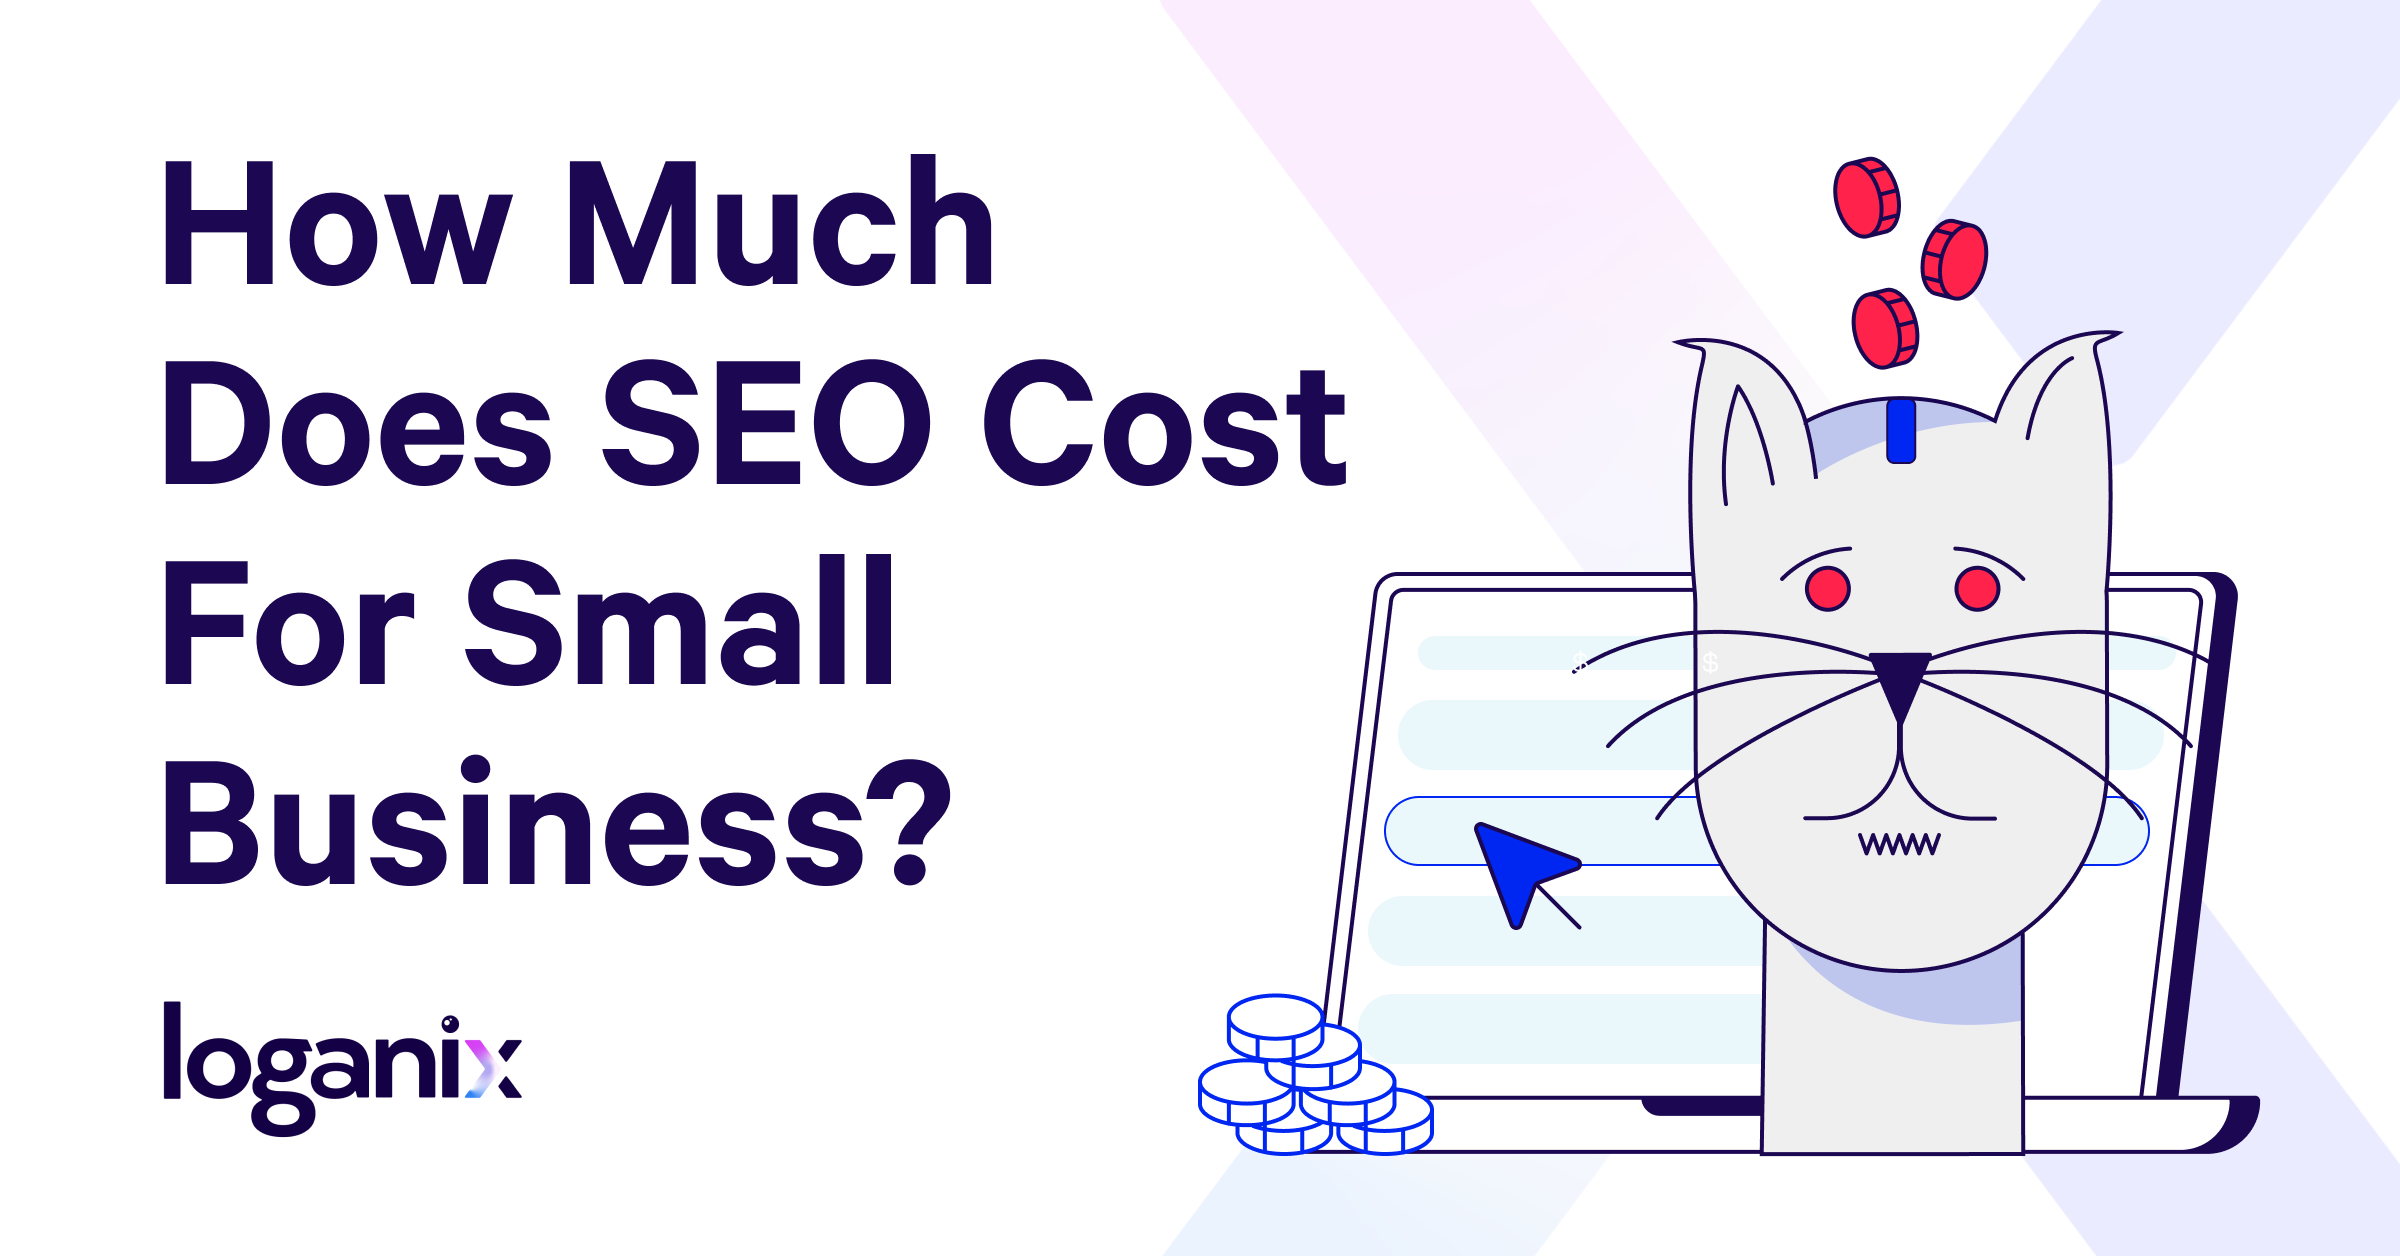 How Much Does SEO Cost For Small Business?